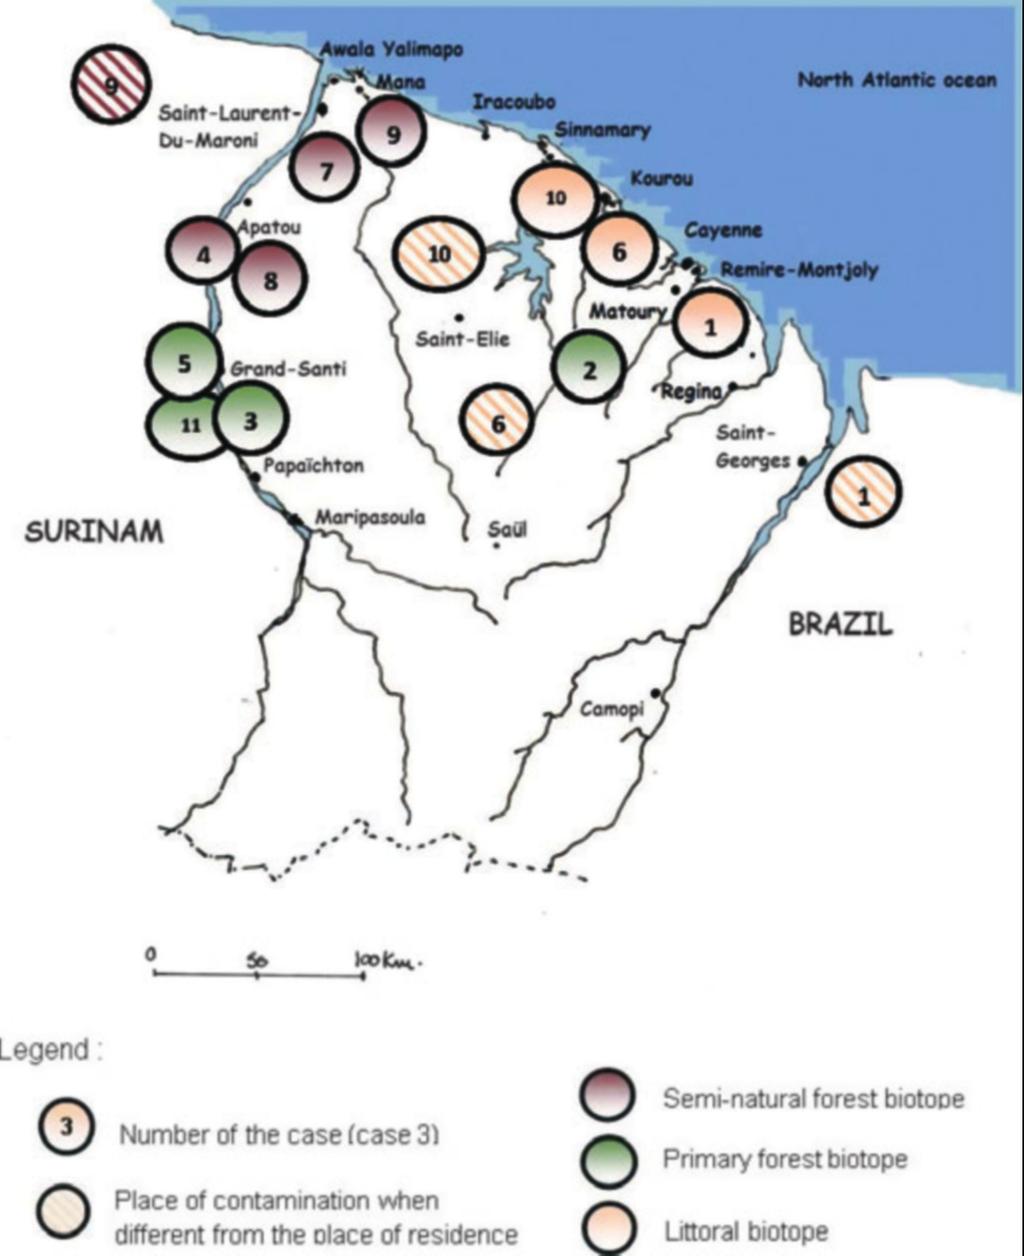 E224 Clinical Microbiology and Infection, Volume 18 Number 7, July 2012 CMI FIG. 1. Map of French Guiana indicating for each patient the place and the biotope of their residence and the place of contamination.